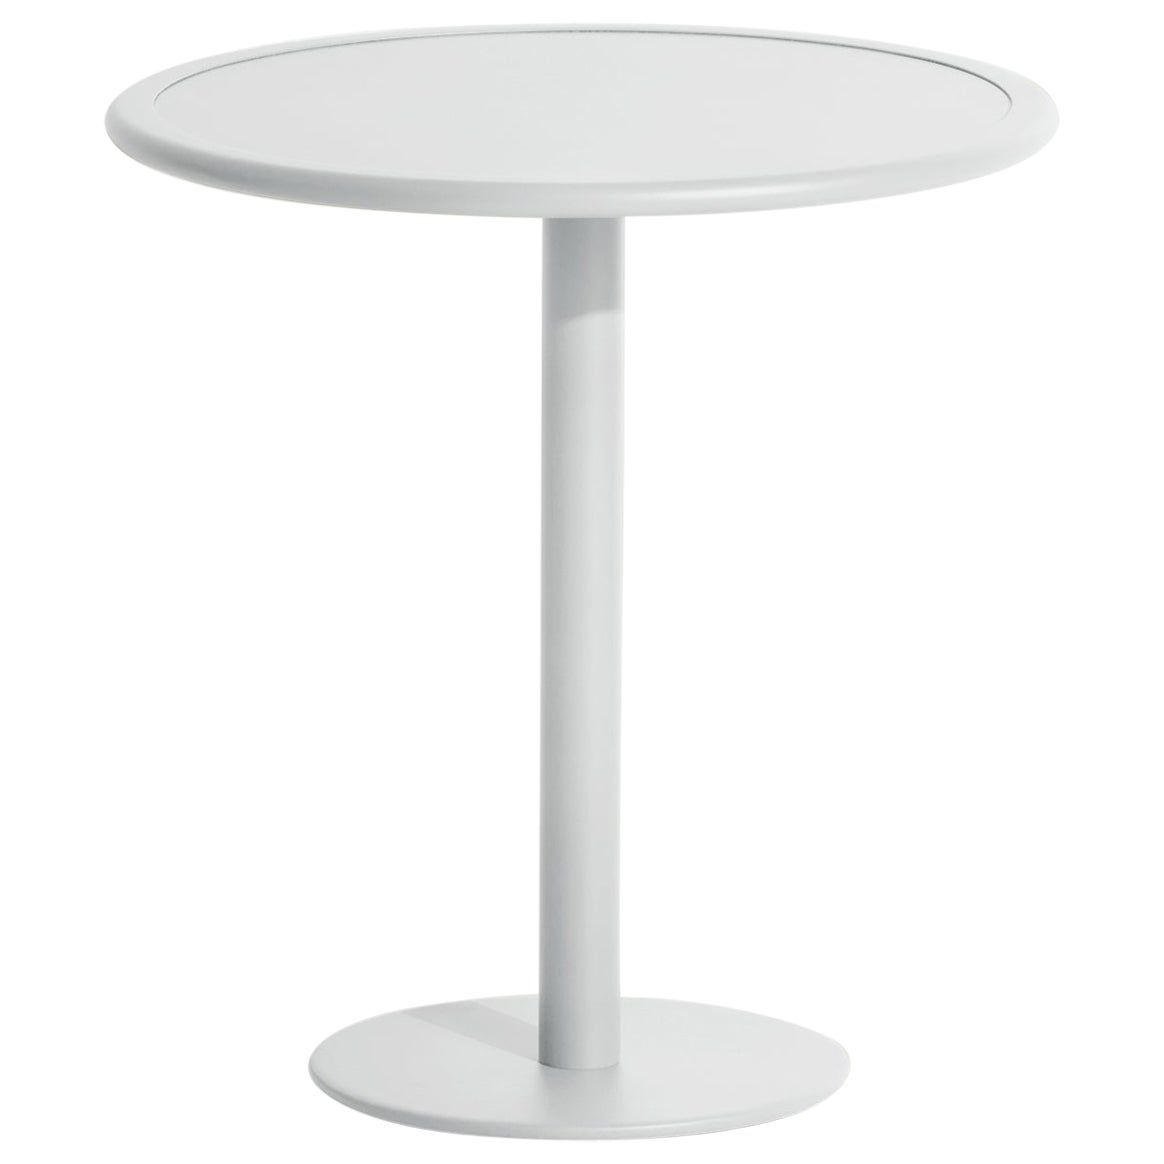 Petite Friture Week-End Bistro Round Dining Table in Pearl Grey Aluminium, 2017